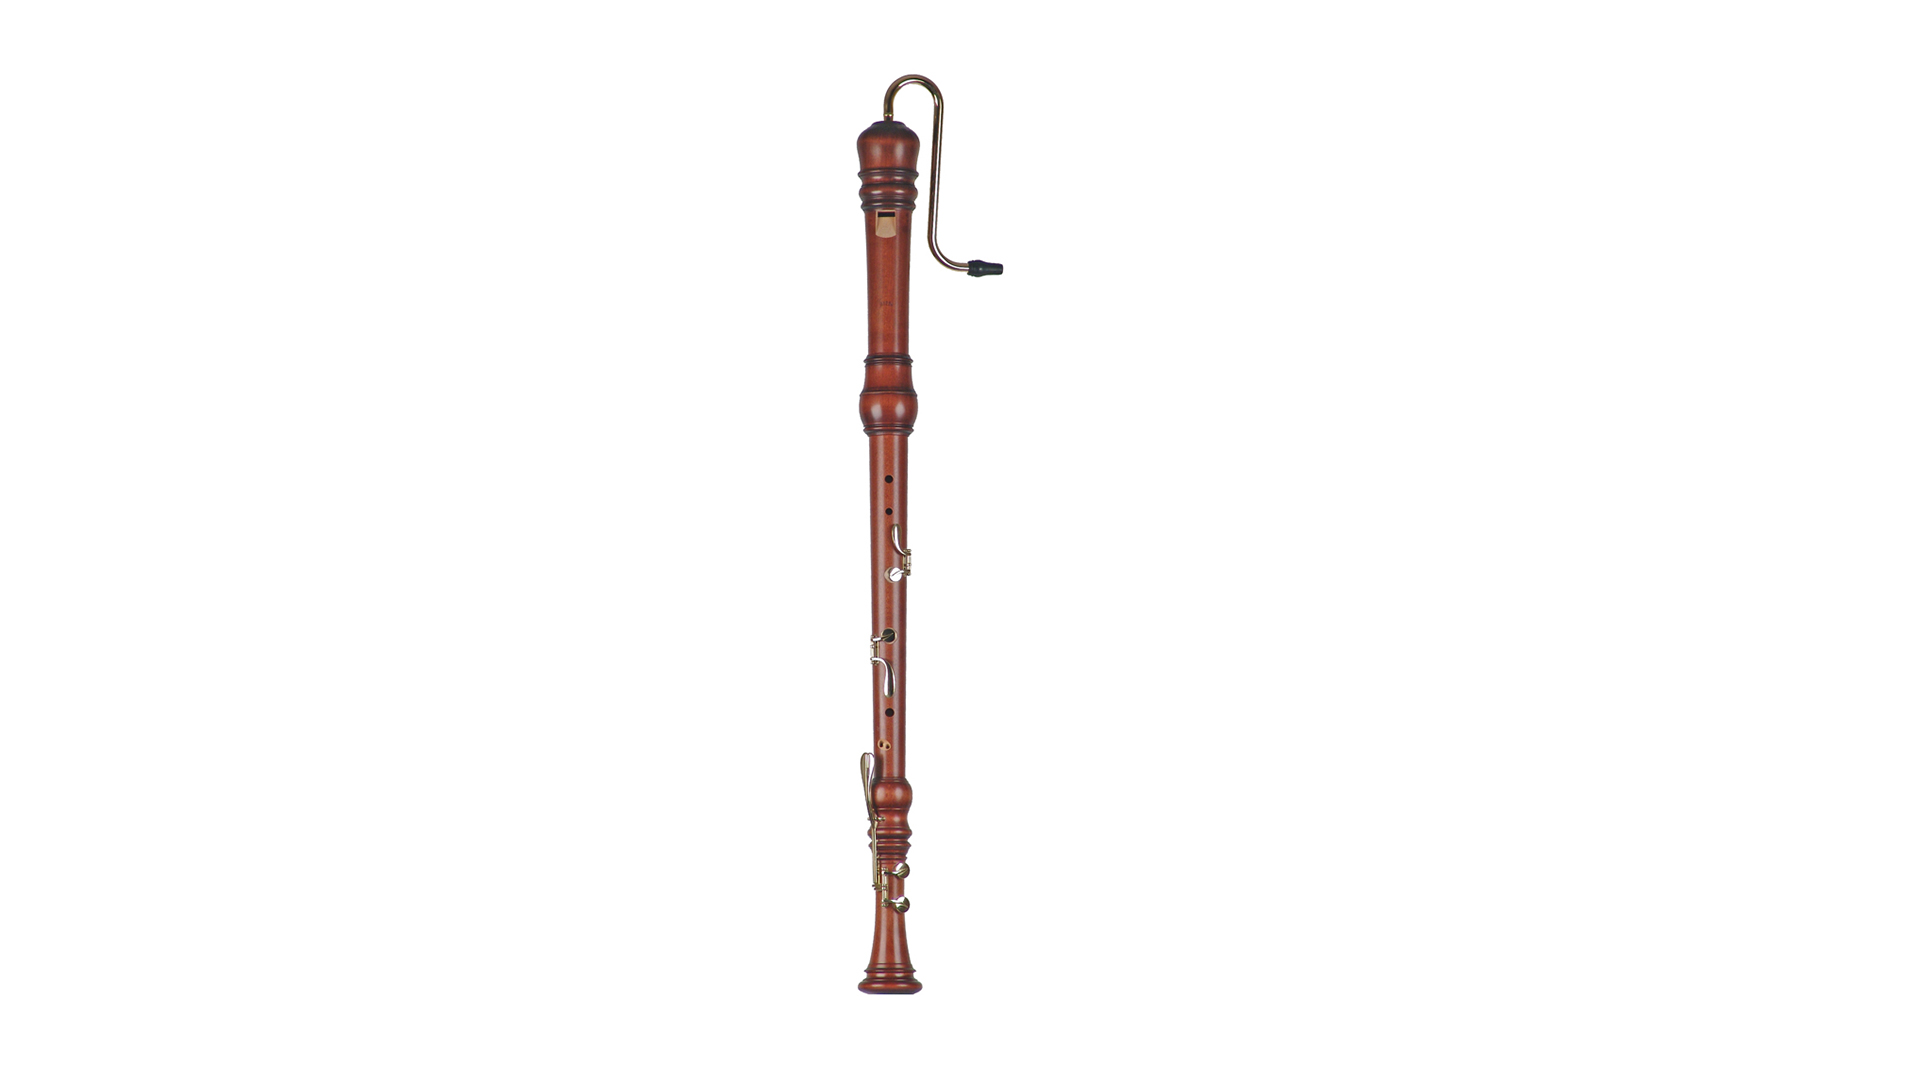 Moeck, "Rottenburgh", bass in f, baroque double hole, 442 Hz, maple stained, expandable to 415Hz